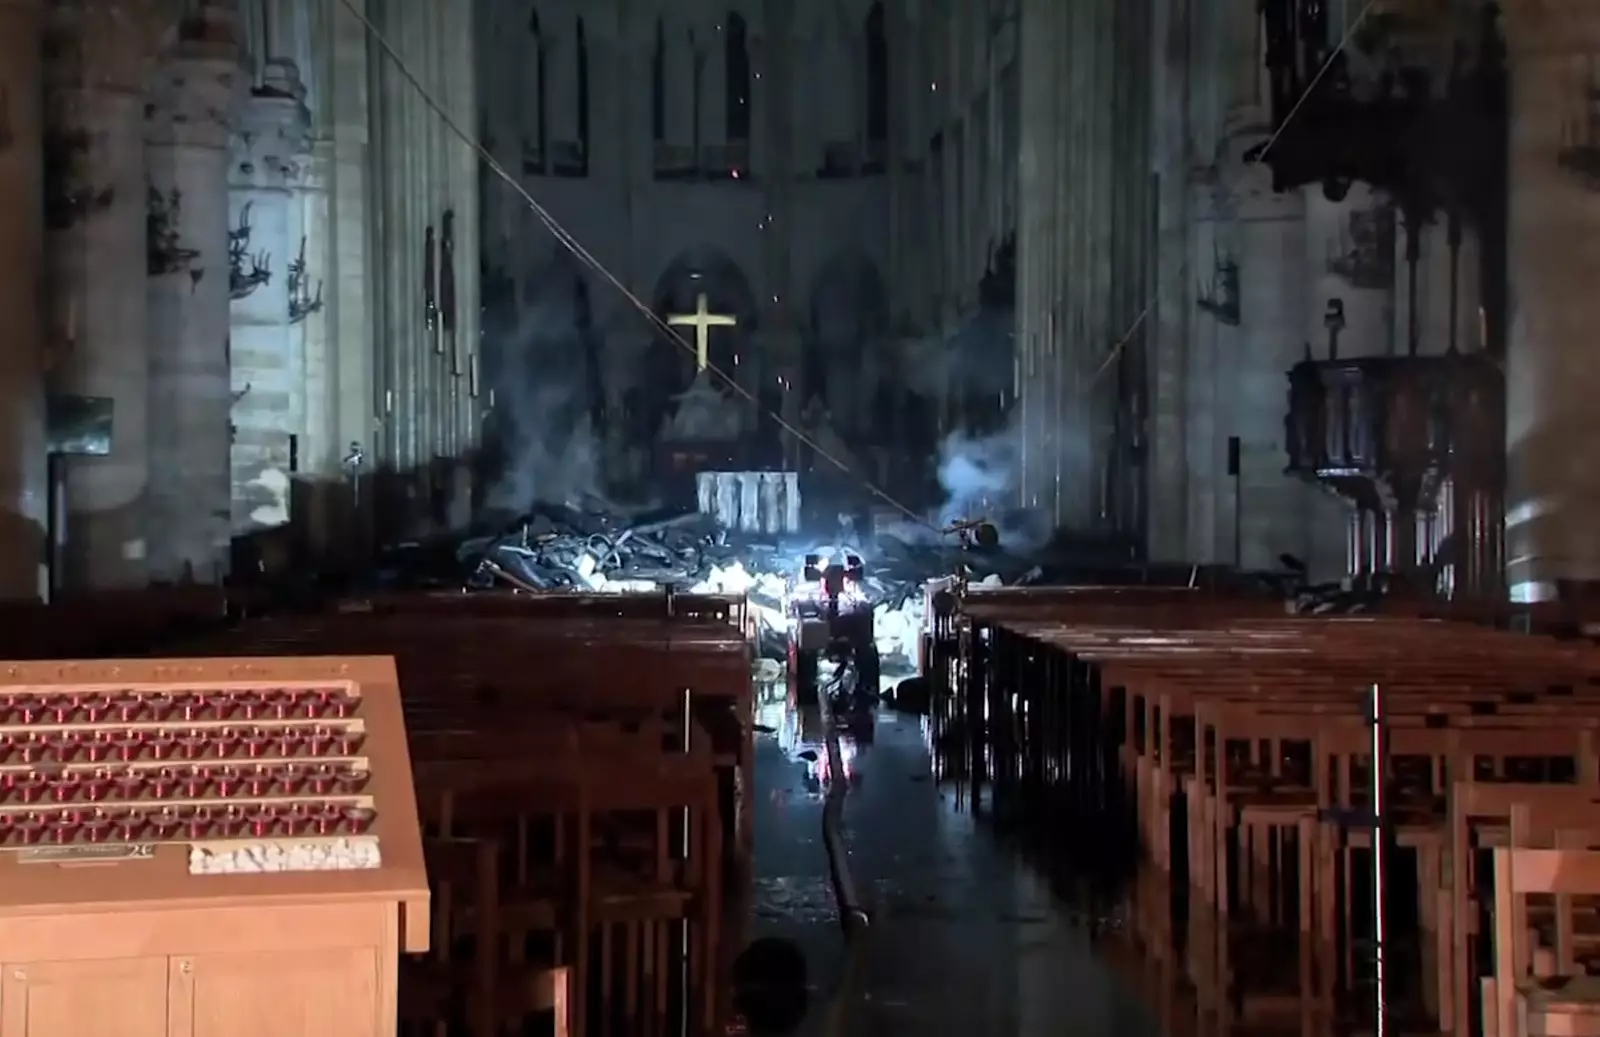 The inside of the cathedral after the fire.